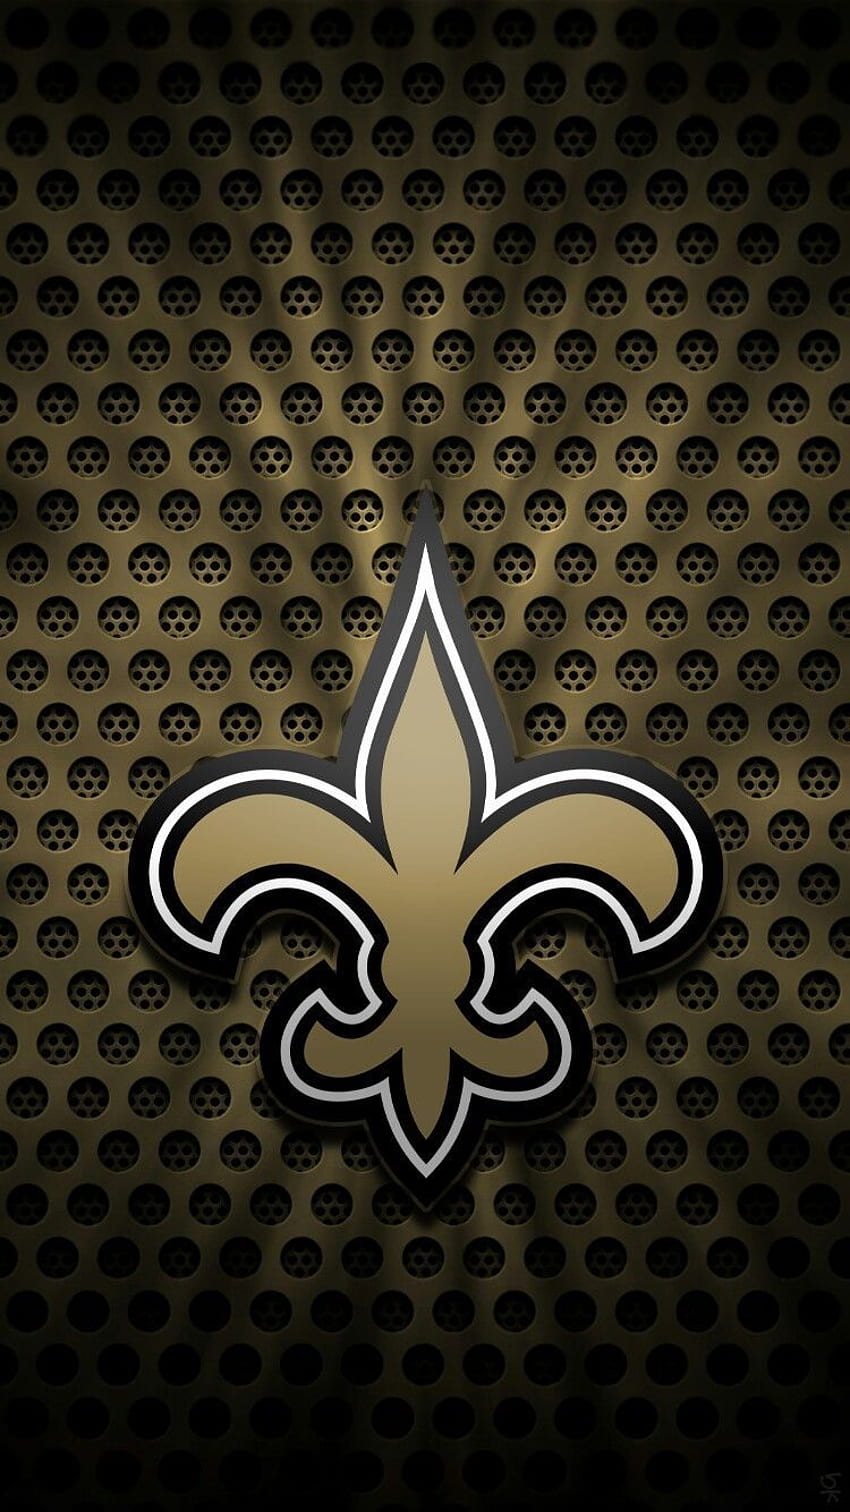 New Orleans Saints I Phone & Android Screensaver. New Orleans Saints, Nfl Saints, New Orleans HD phone wallpaper